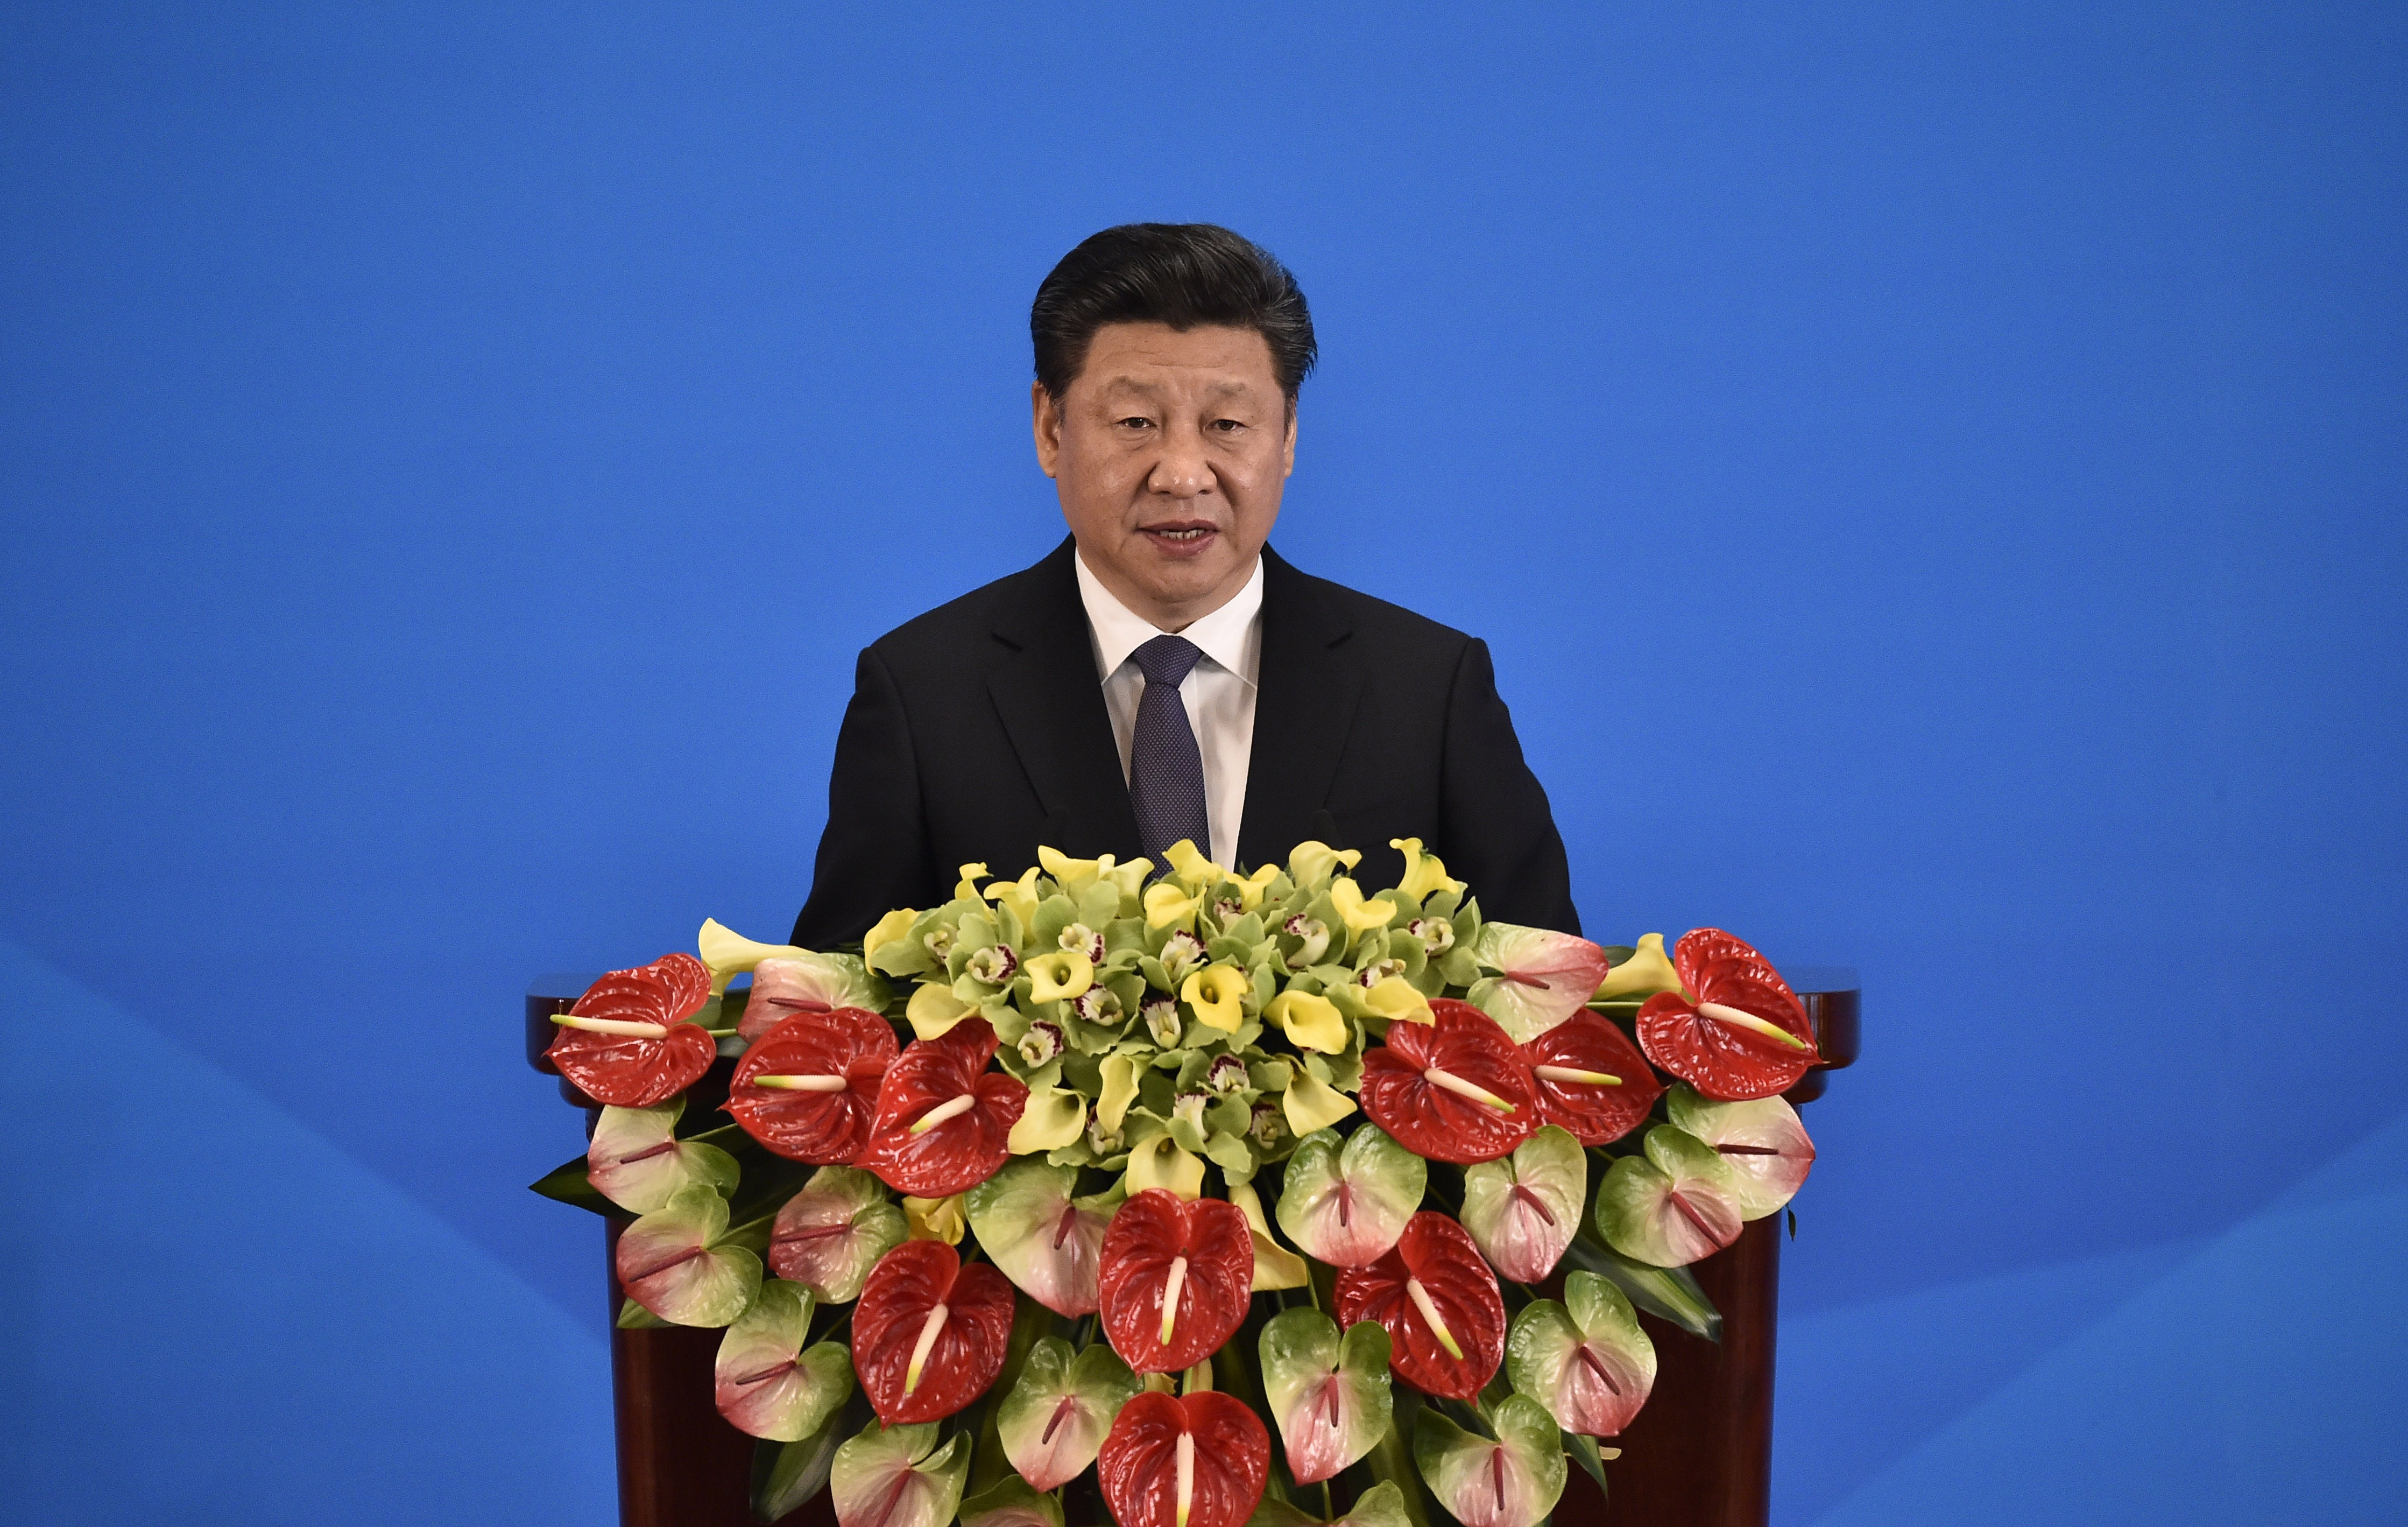 China's President Xi Jinping delivers a speech at the opening ceremony of the fifth regular foreign ministers' meeting of the Conference on Interaction and Confidence Building Measures in Asia (CICA)  at the Diaoyutai State Guesthouse on April 28, 2016 in Beijing, China. (Iori Sagisawa—Pool/Getty Images)